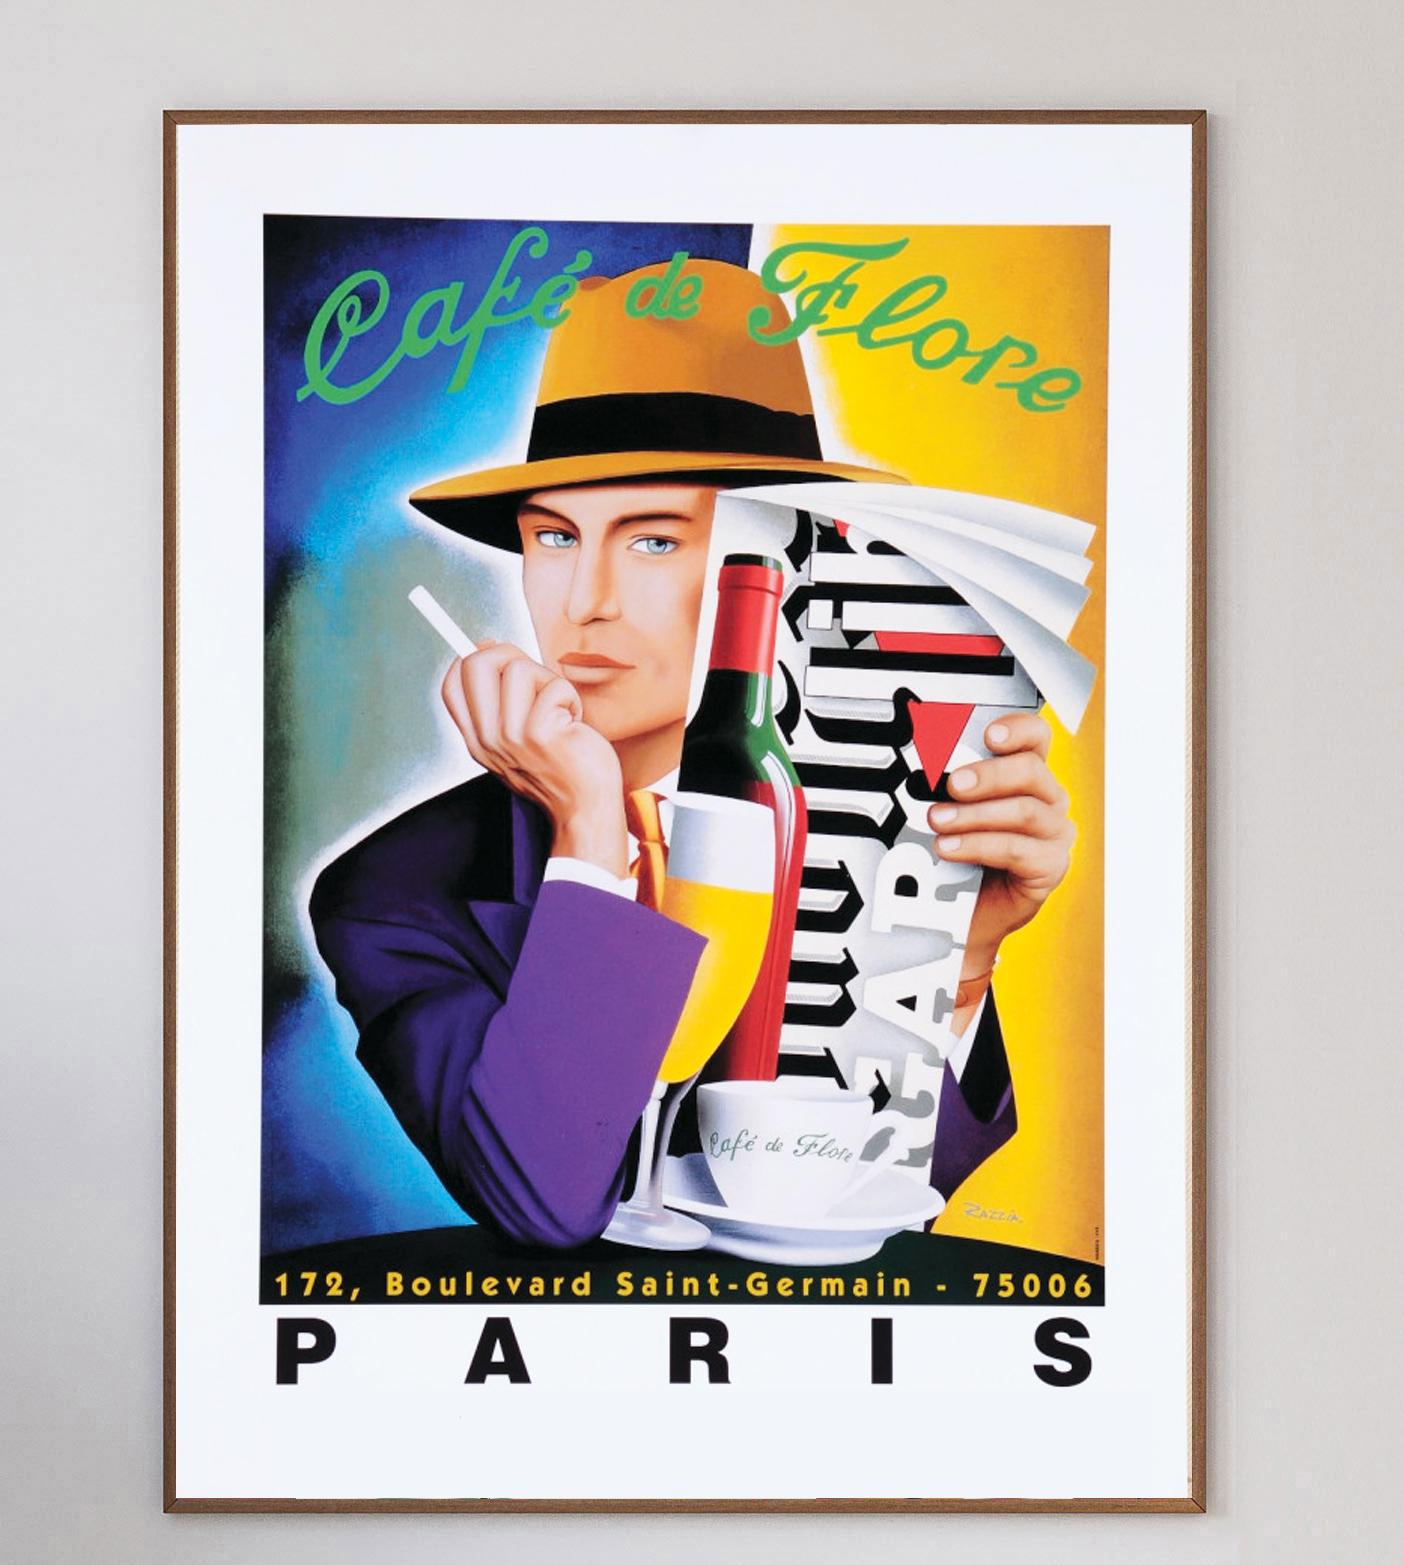 One of the oldest coffeehouses in Pairs, Cafe De Flore opened in the 1880s and is well known for its famous and celebrated clientele. This gorgeous poster was created in 1993 in collaboration with renowned poster artist Razzia.

Razzia is best known